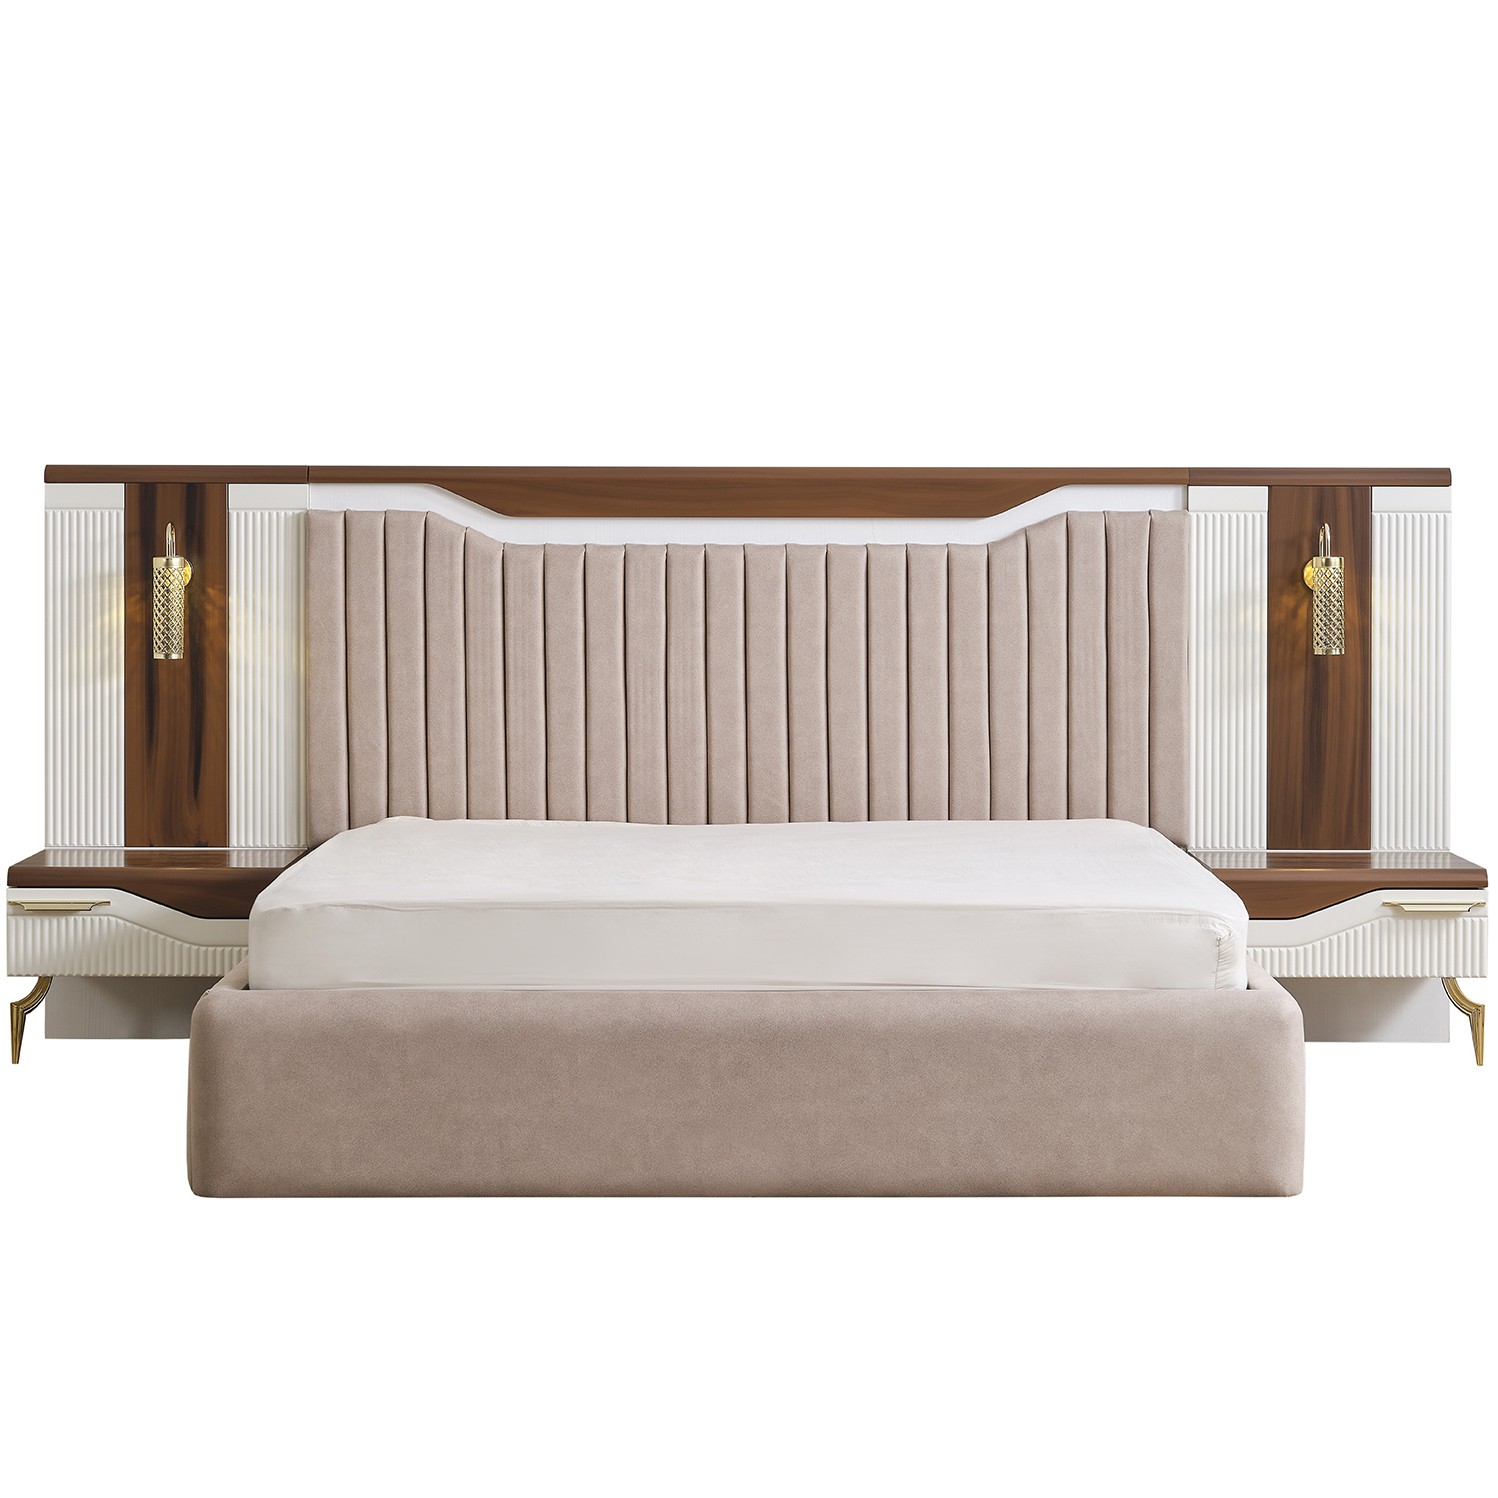 Style Hermes Vol1 Bed With Storage 160x200 cm